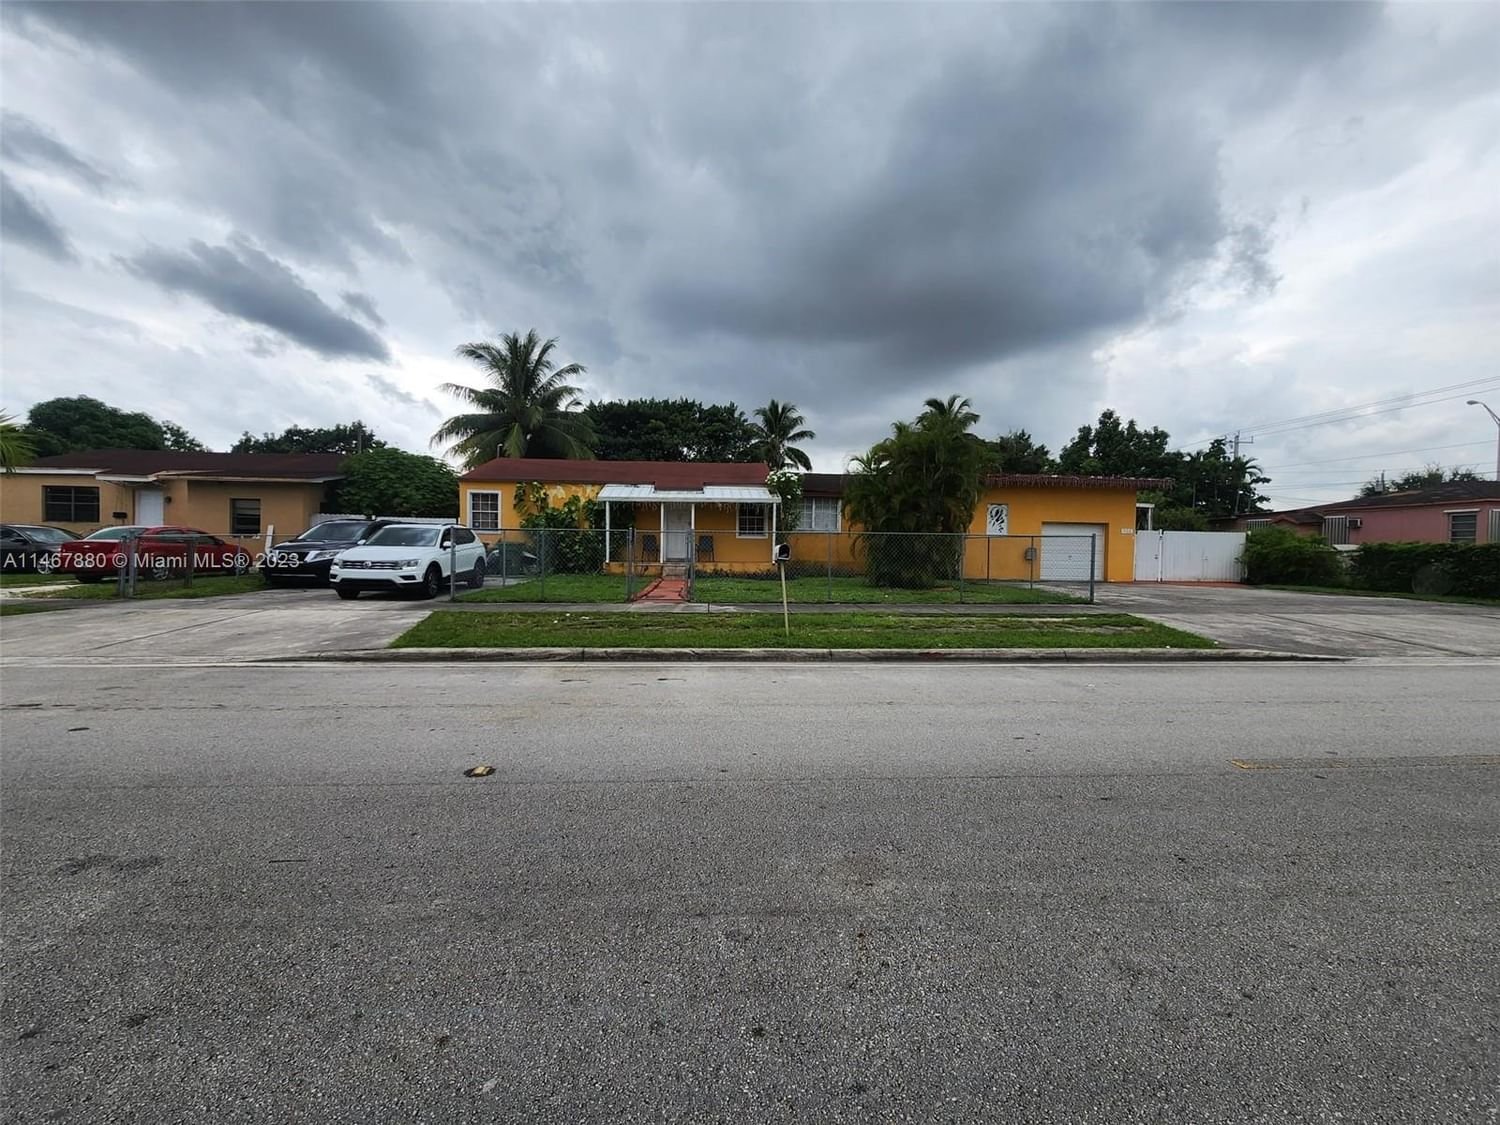 Real estate property located at 924 23rd St, Miami-Dade County, HIALEAH 13TH ADDN AMD PL, Hialeah, FL